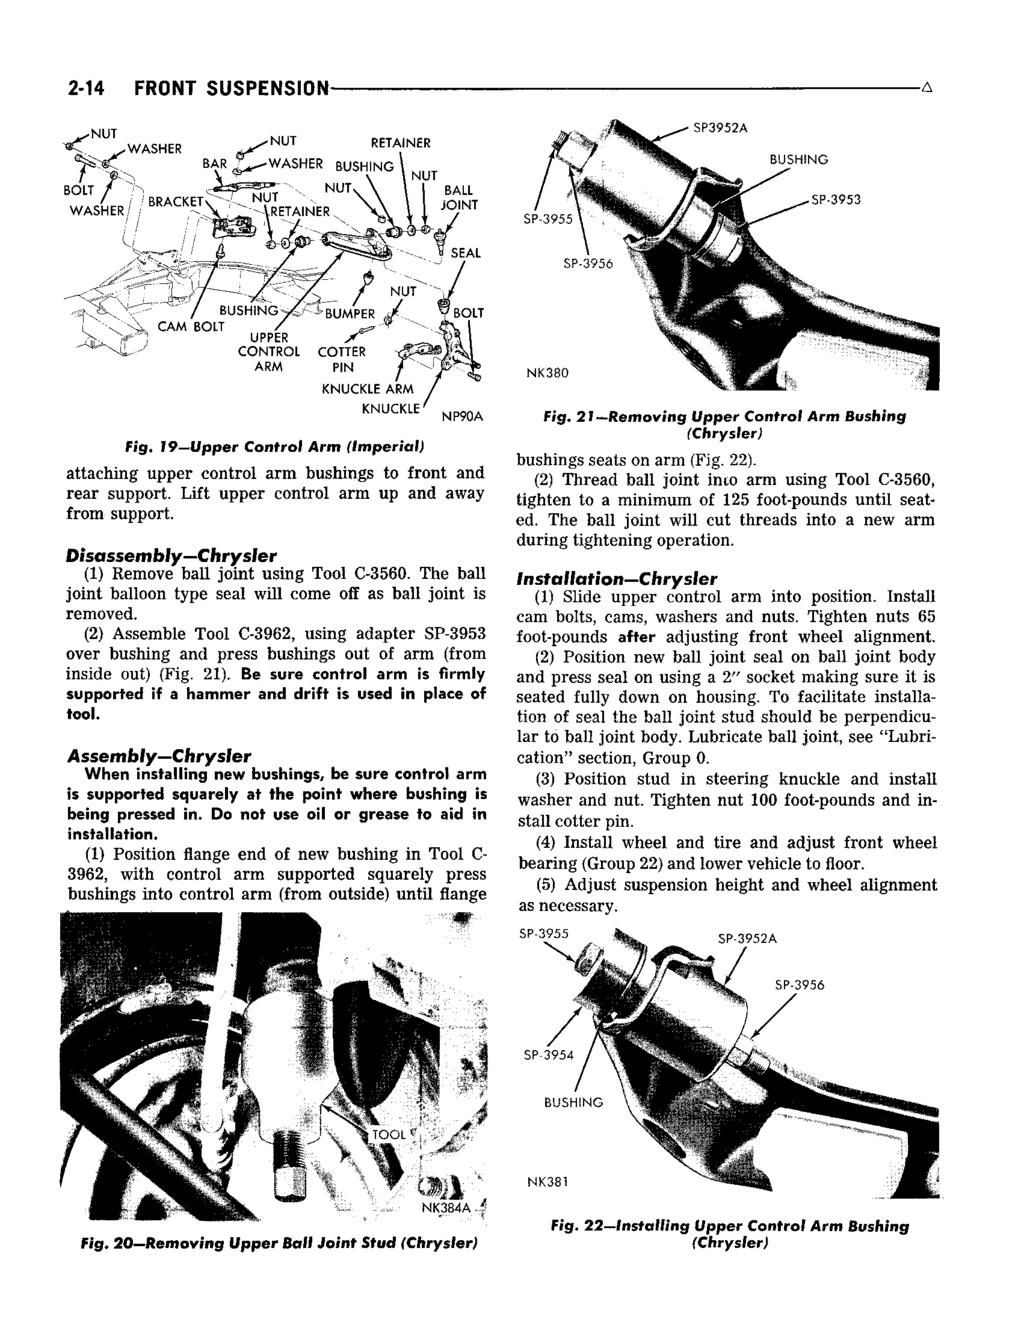 2-14 FRONT SUSPENSION -A Fig. 19 Upper Control Arm (Imperial) attaching upper control arm bushings to front and rear support. Lift upper control arm up and away from support.